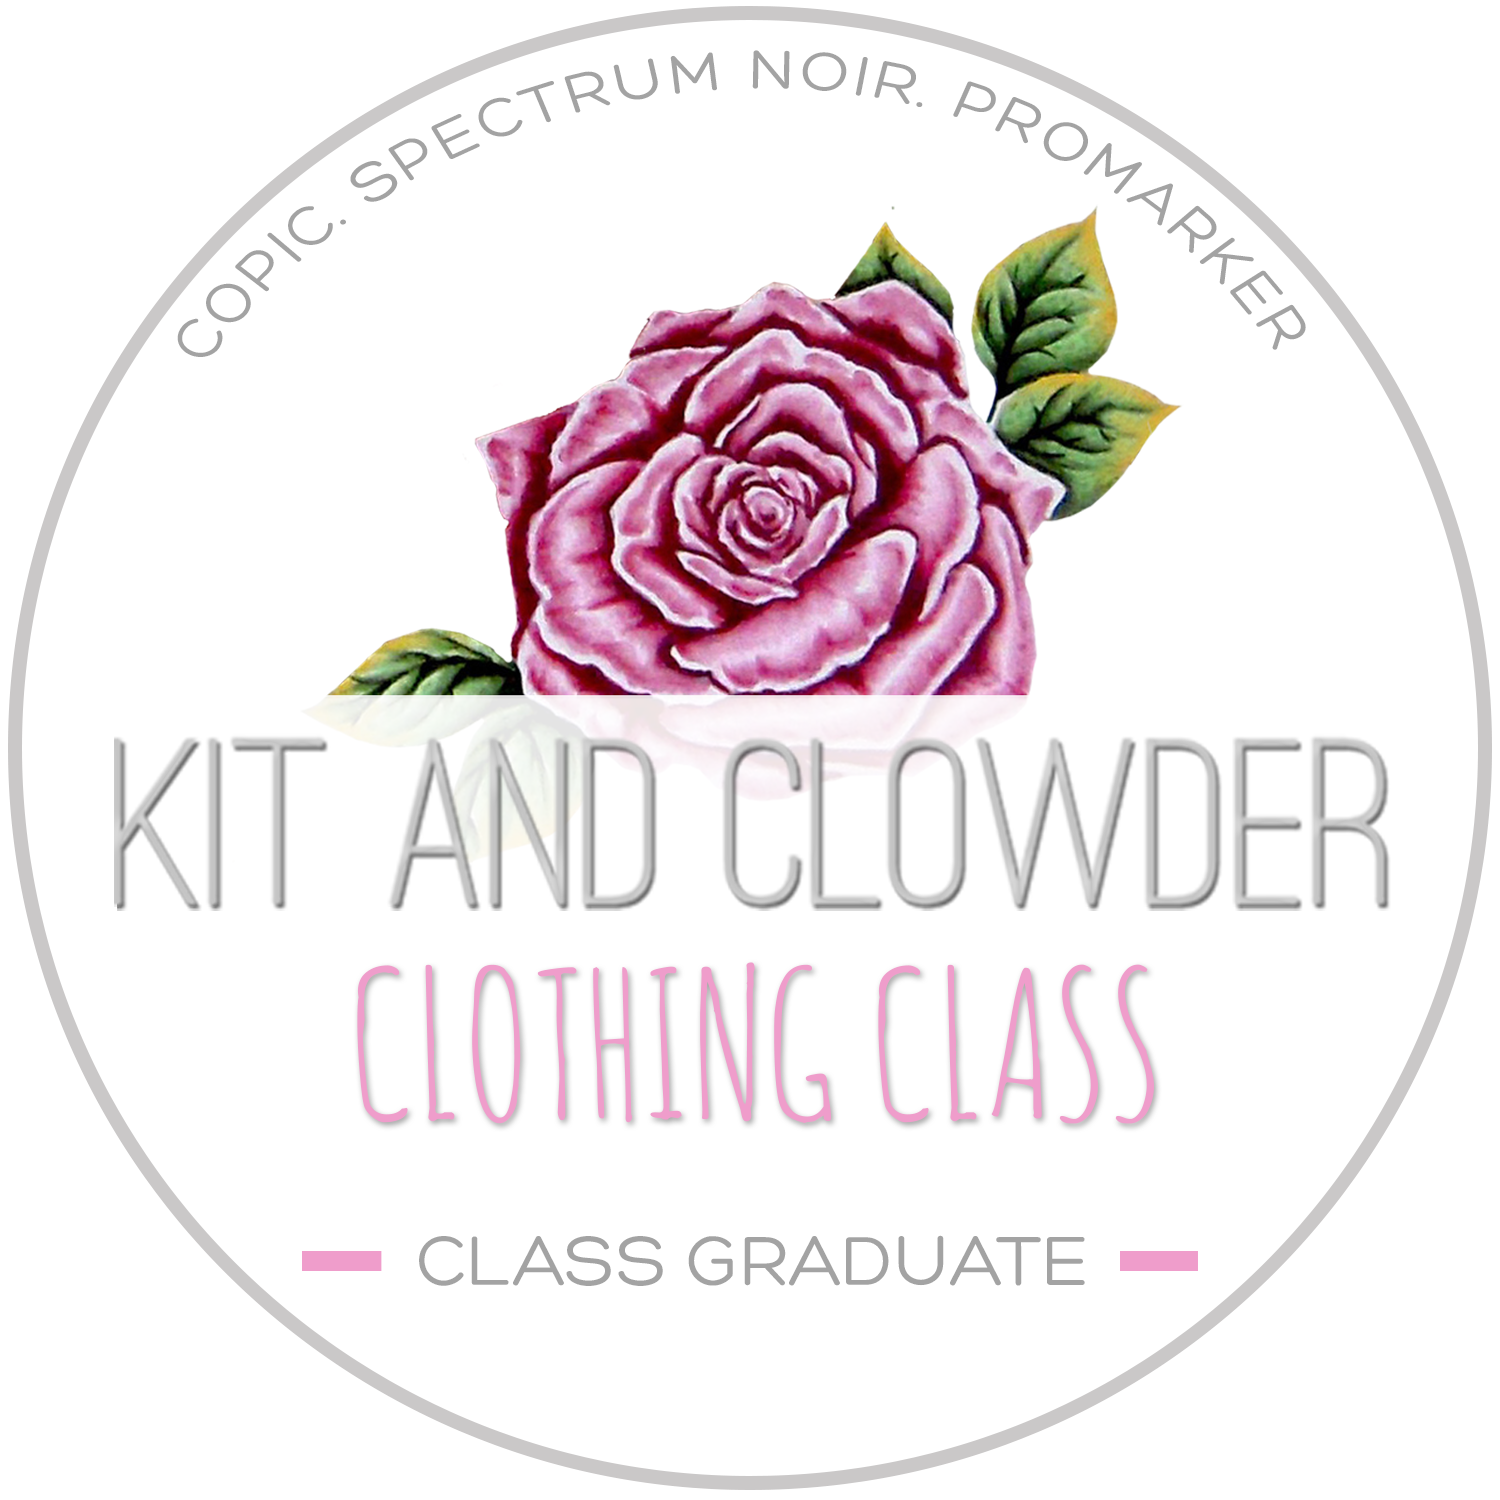 Kit and Clowder Clothing Class